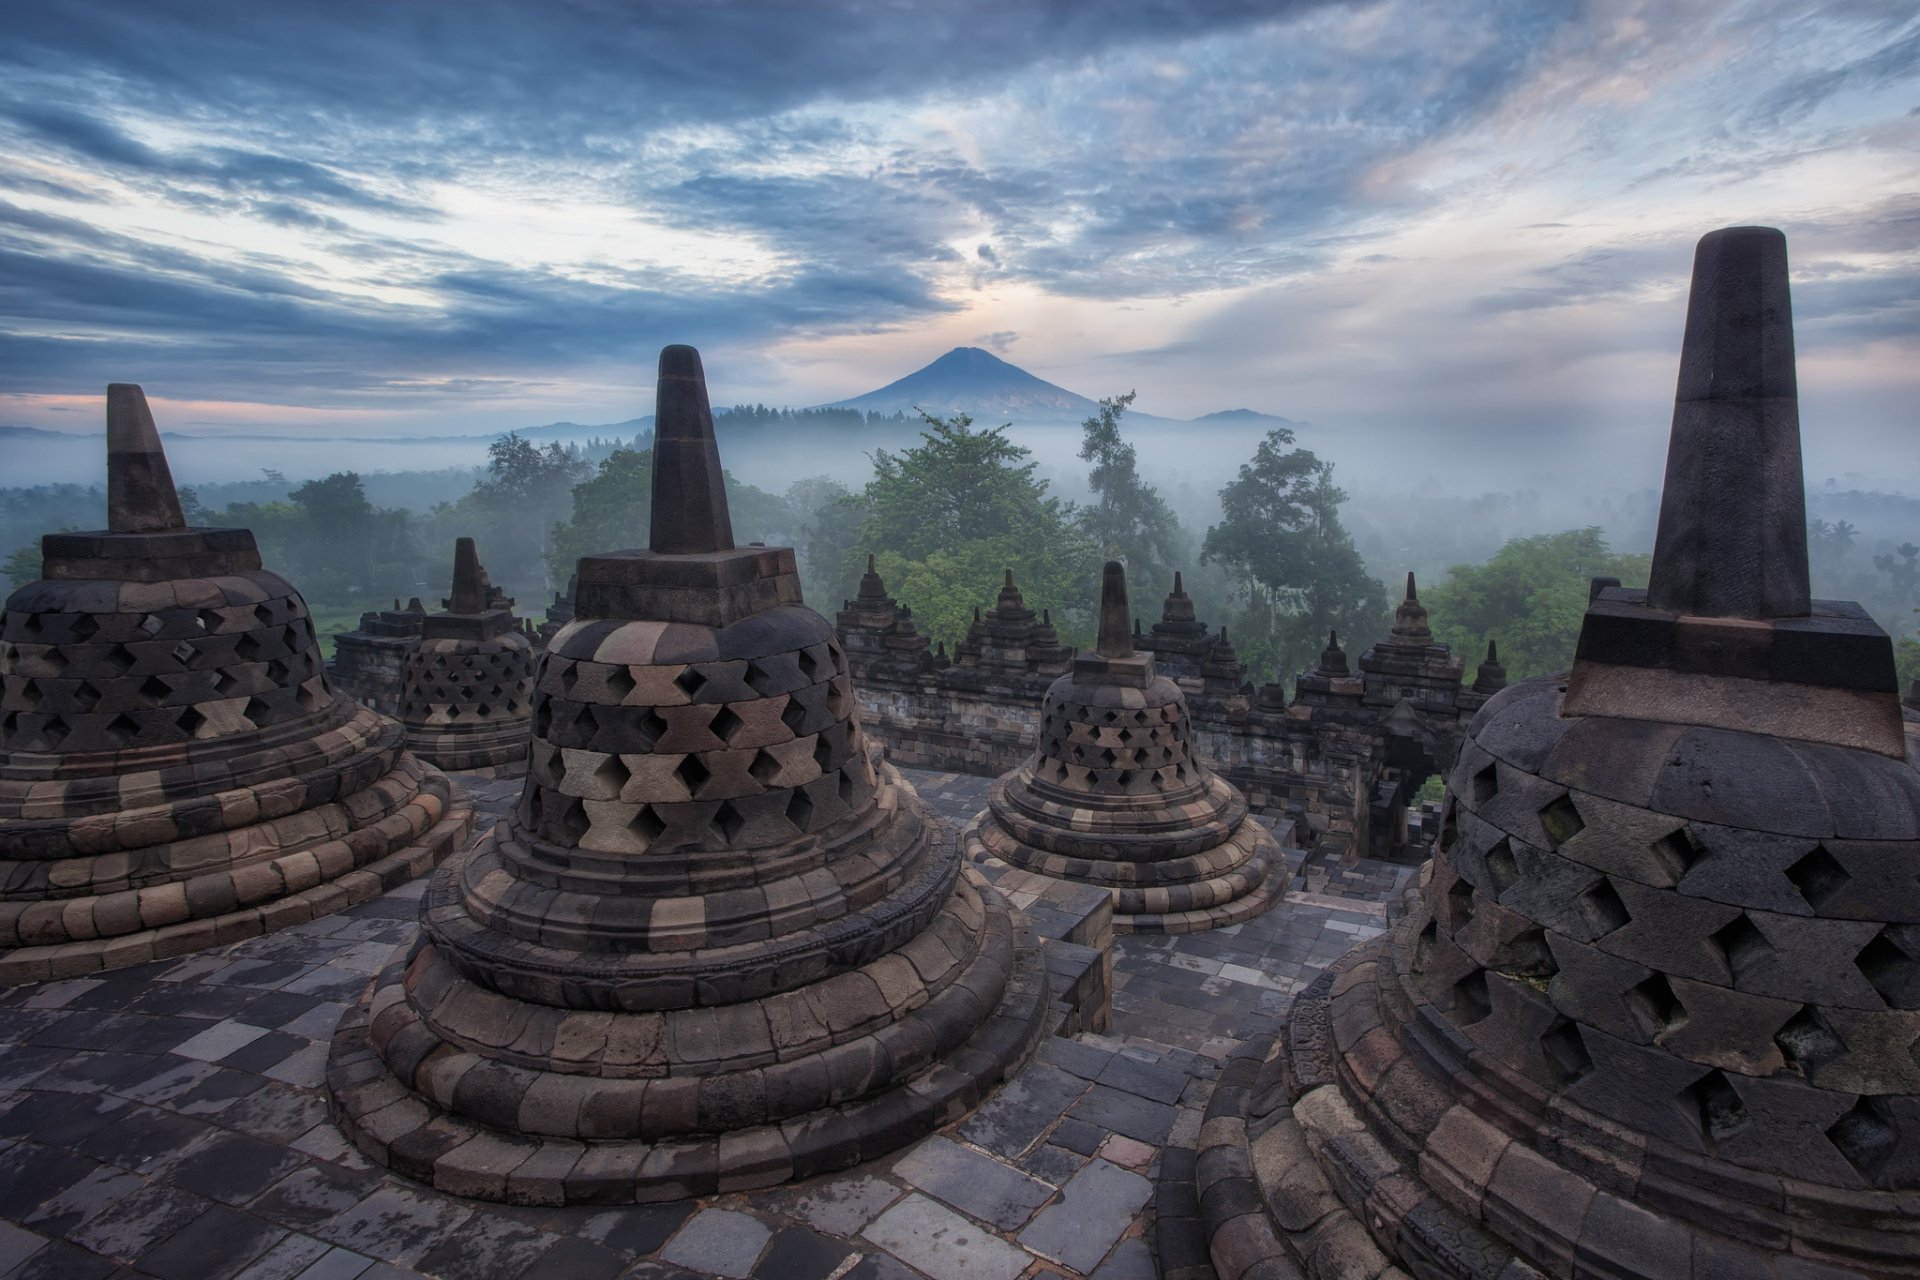 Borobudur Buddhist Temple in Magelang Central  Java  